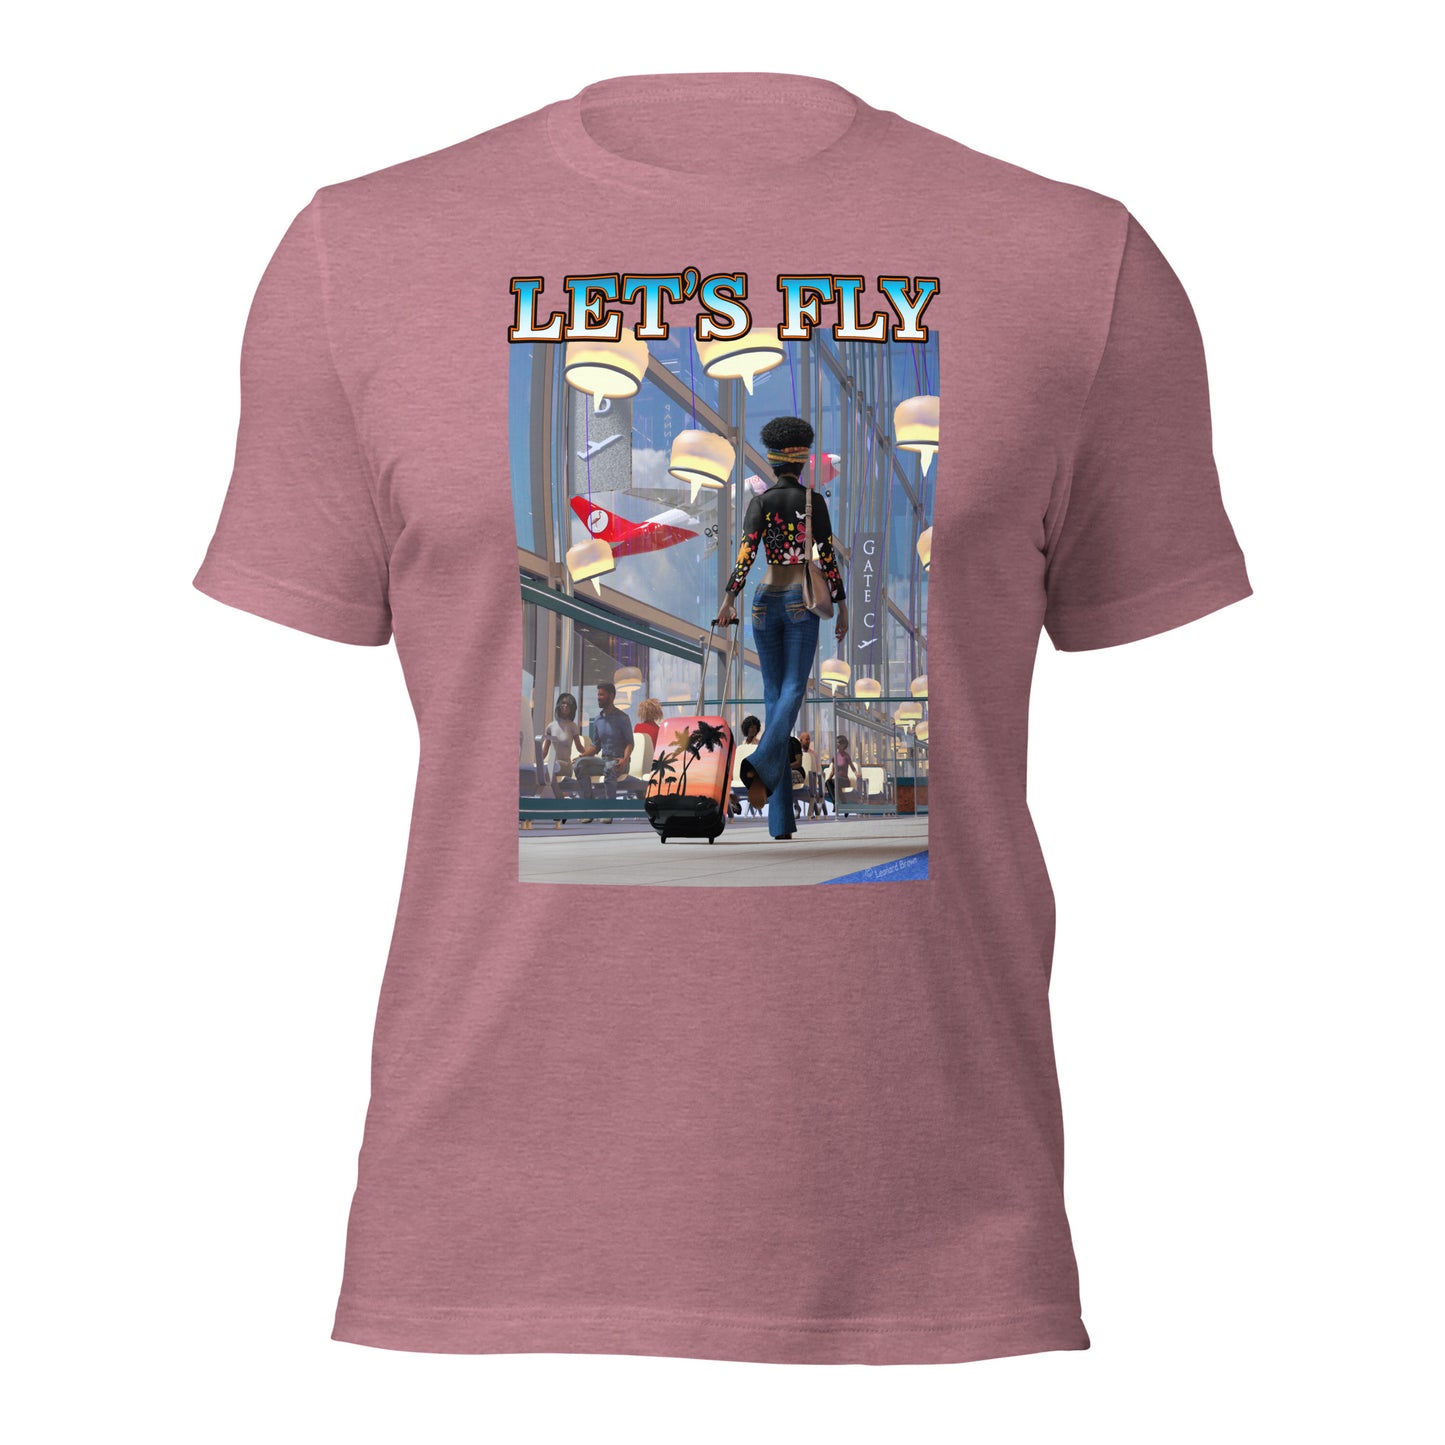 Let’s Fly Red Plane t-shirt